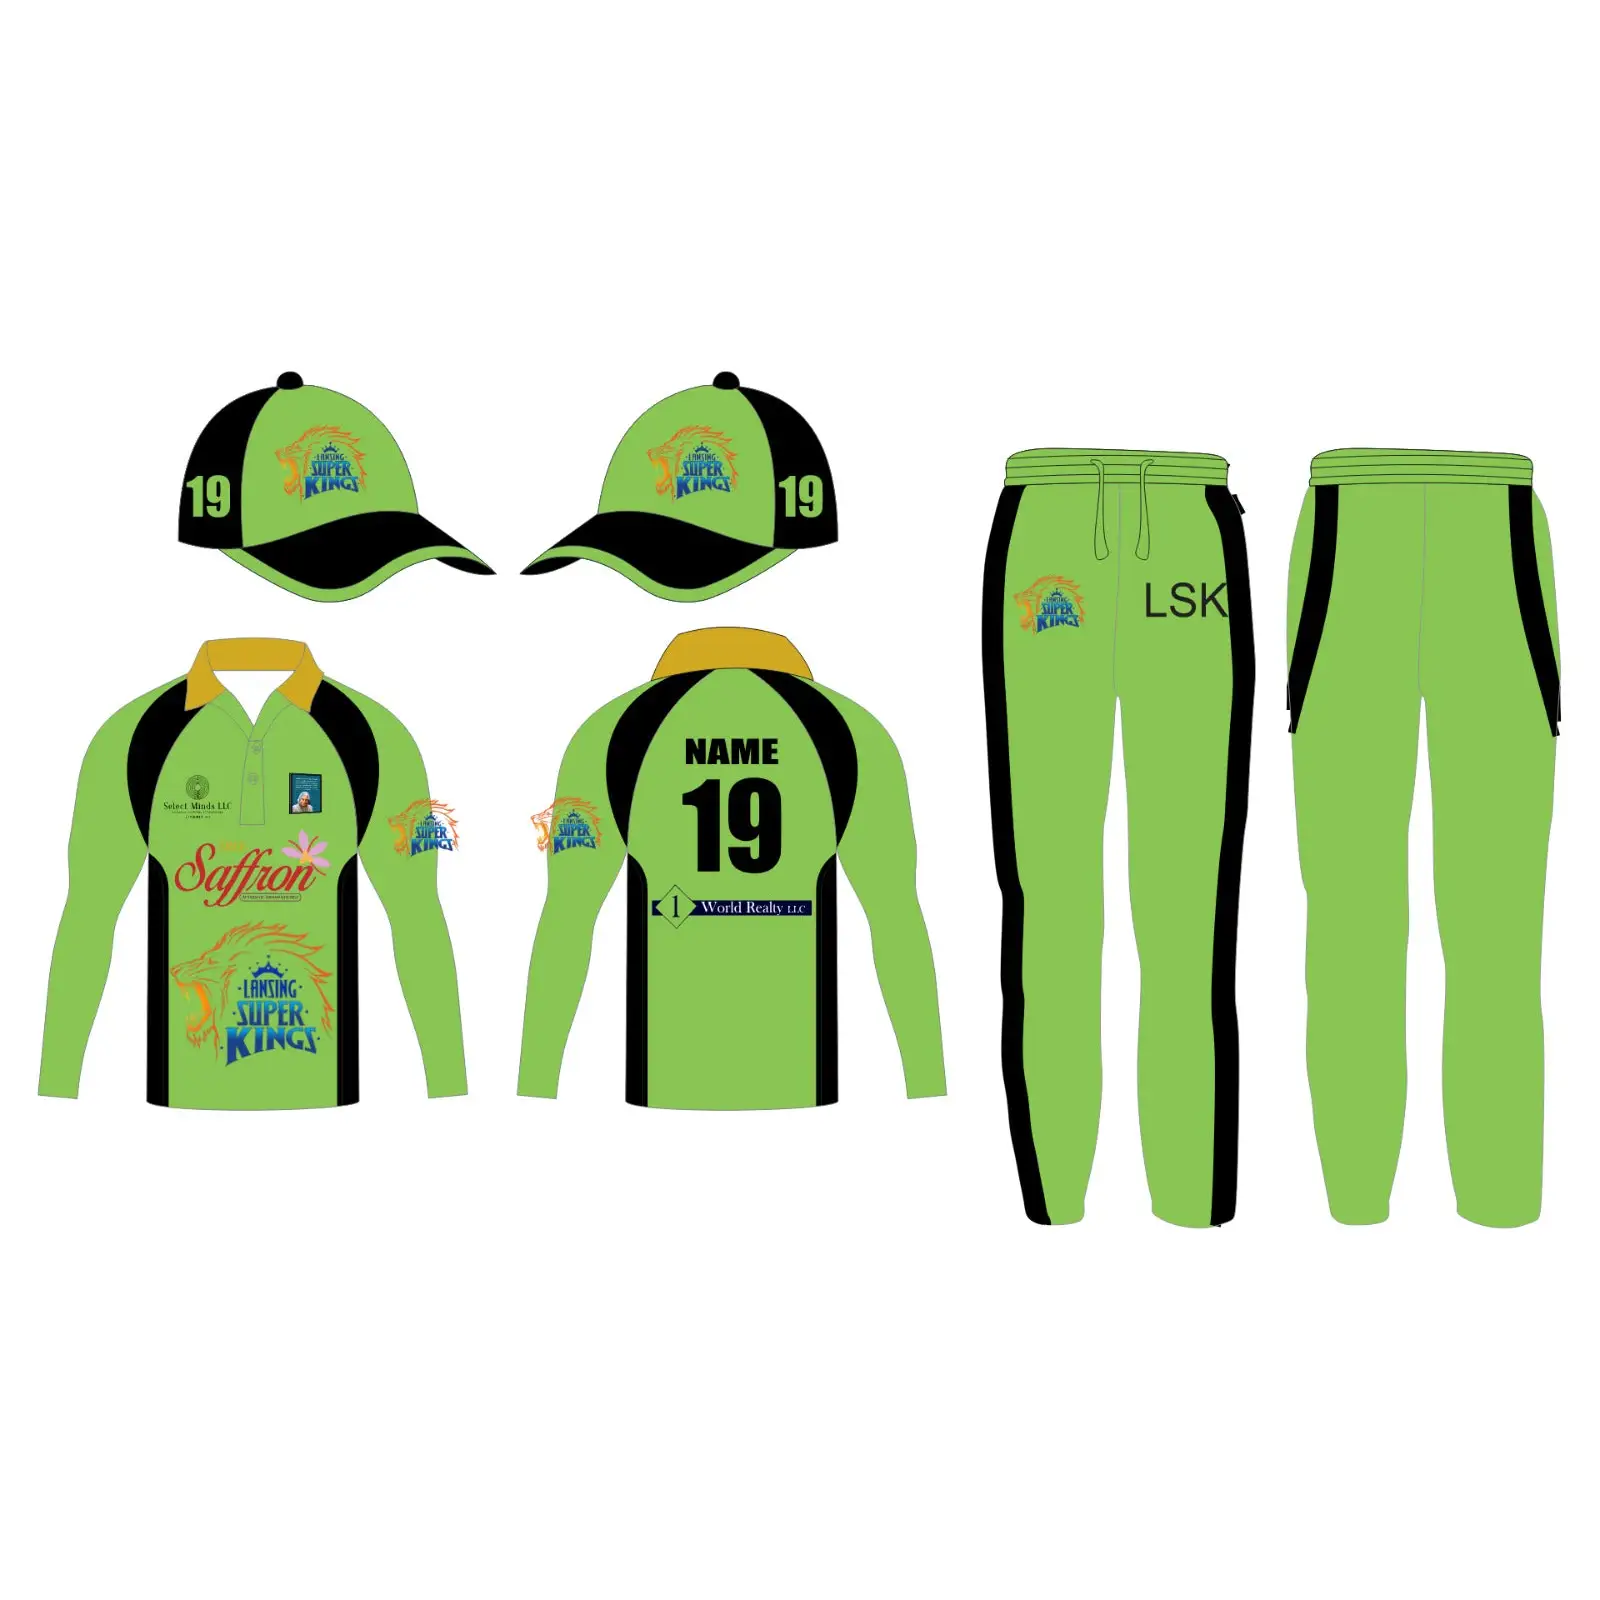 Green & Black Cricket Uniform Fully Customizable with Name and Number 3 Piece Set - Custom Wear 3PC Full